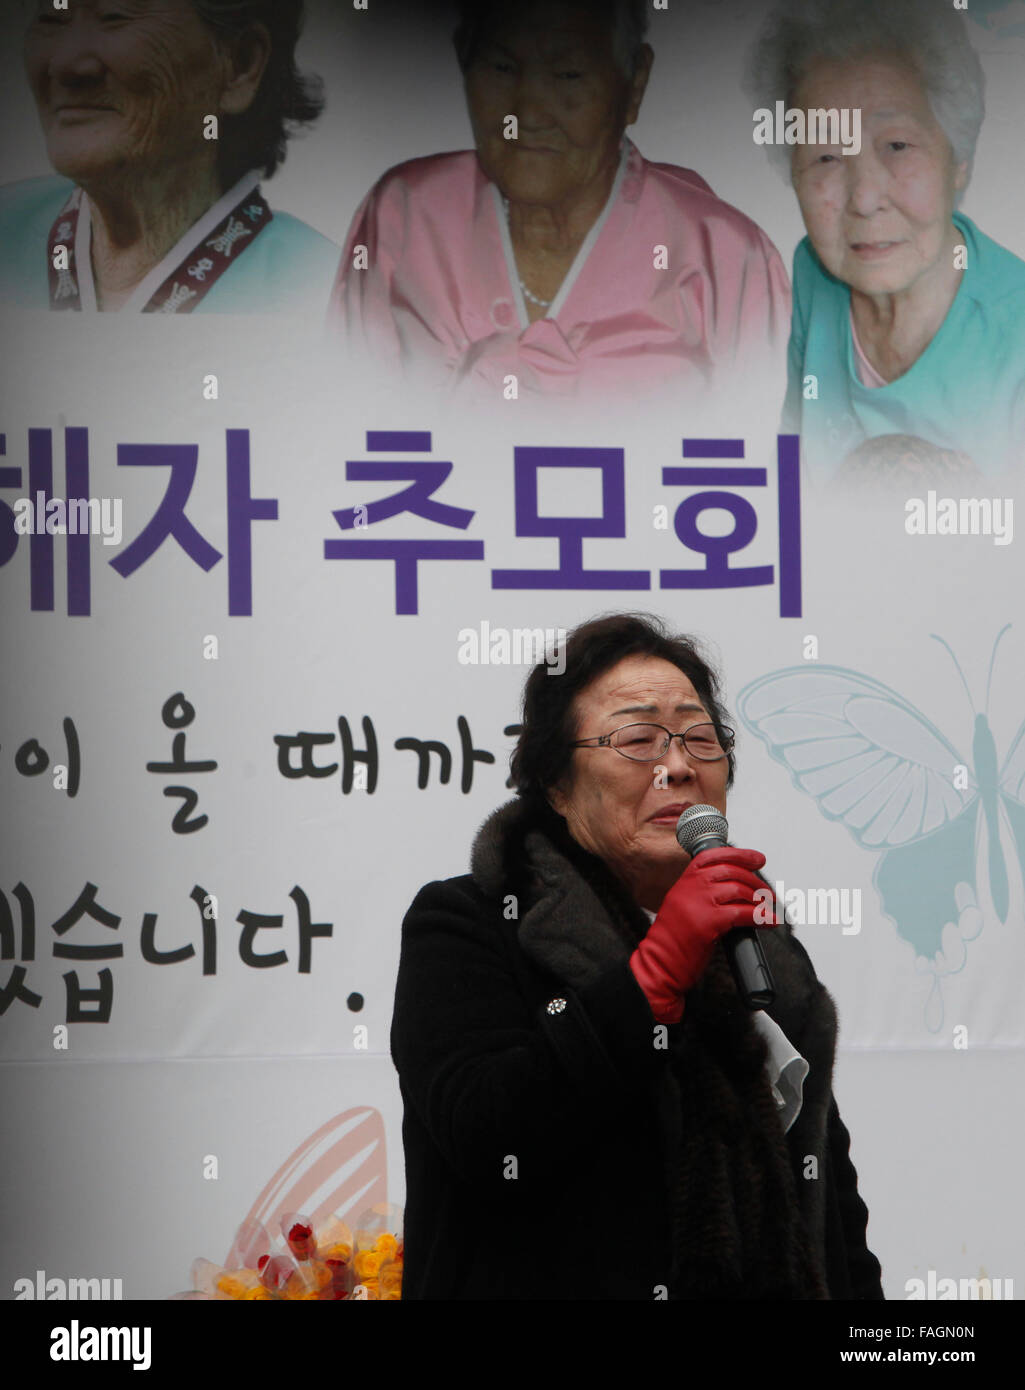 Seoul, South Korea. 30th Dec, 2015. Former South Korean 'comfort women' Lee Yong-soo speaks at a weekly anti-Japan protest in front of the Japanese embassy in Seoul, South Korea, Dec. 30, 2015. Credit:  Yao Qilin/Xinhua/Alamy Live News Stock Photo